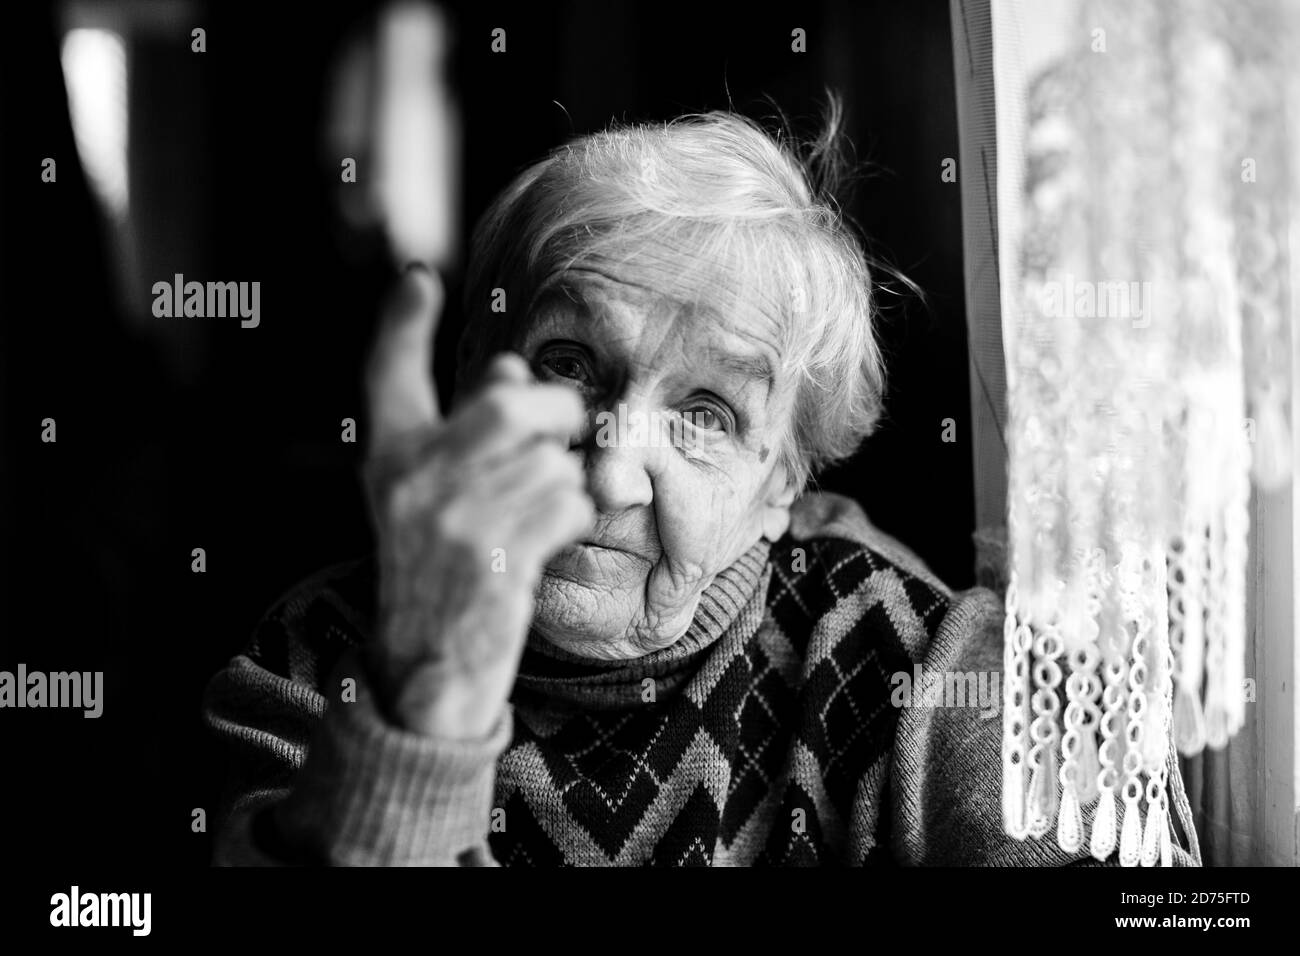 An elderly woman threatens with a finger looking at the camera. Black and white photography. Stock Photo